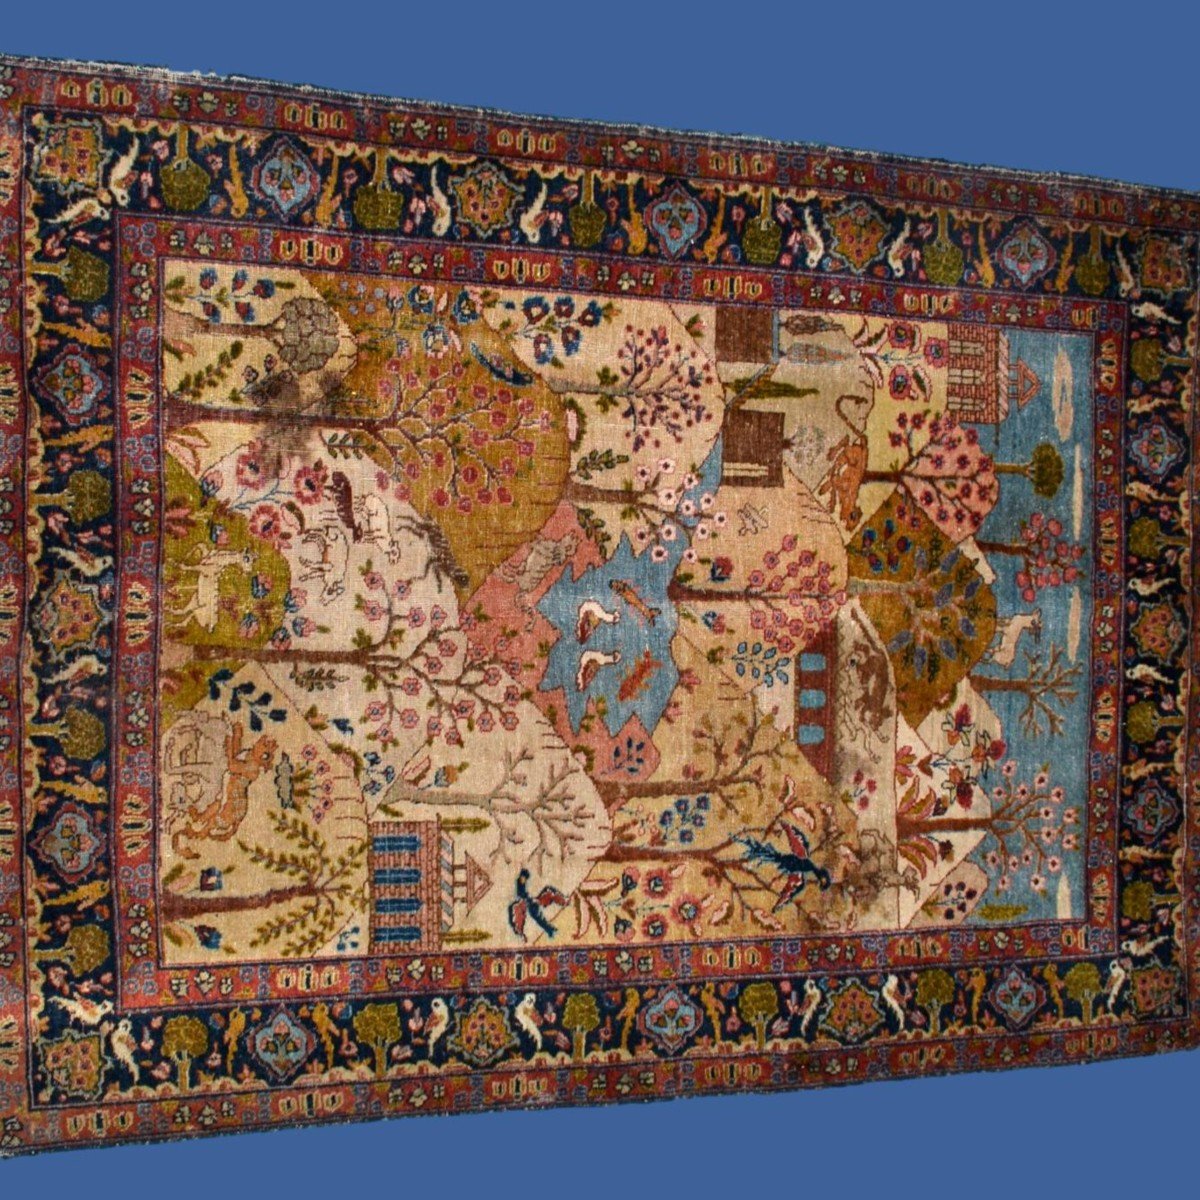 Painting Rug, Old Tabriz, 142 Cm X 188 Cm, Hand-knotted Wool In Persia, Iran Circa 1880 - 1900-photo-2